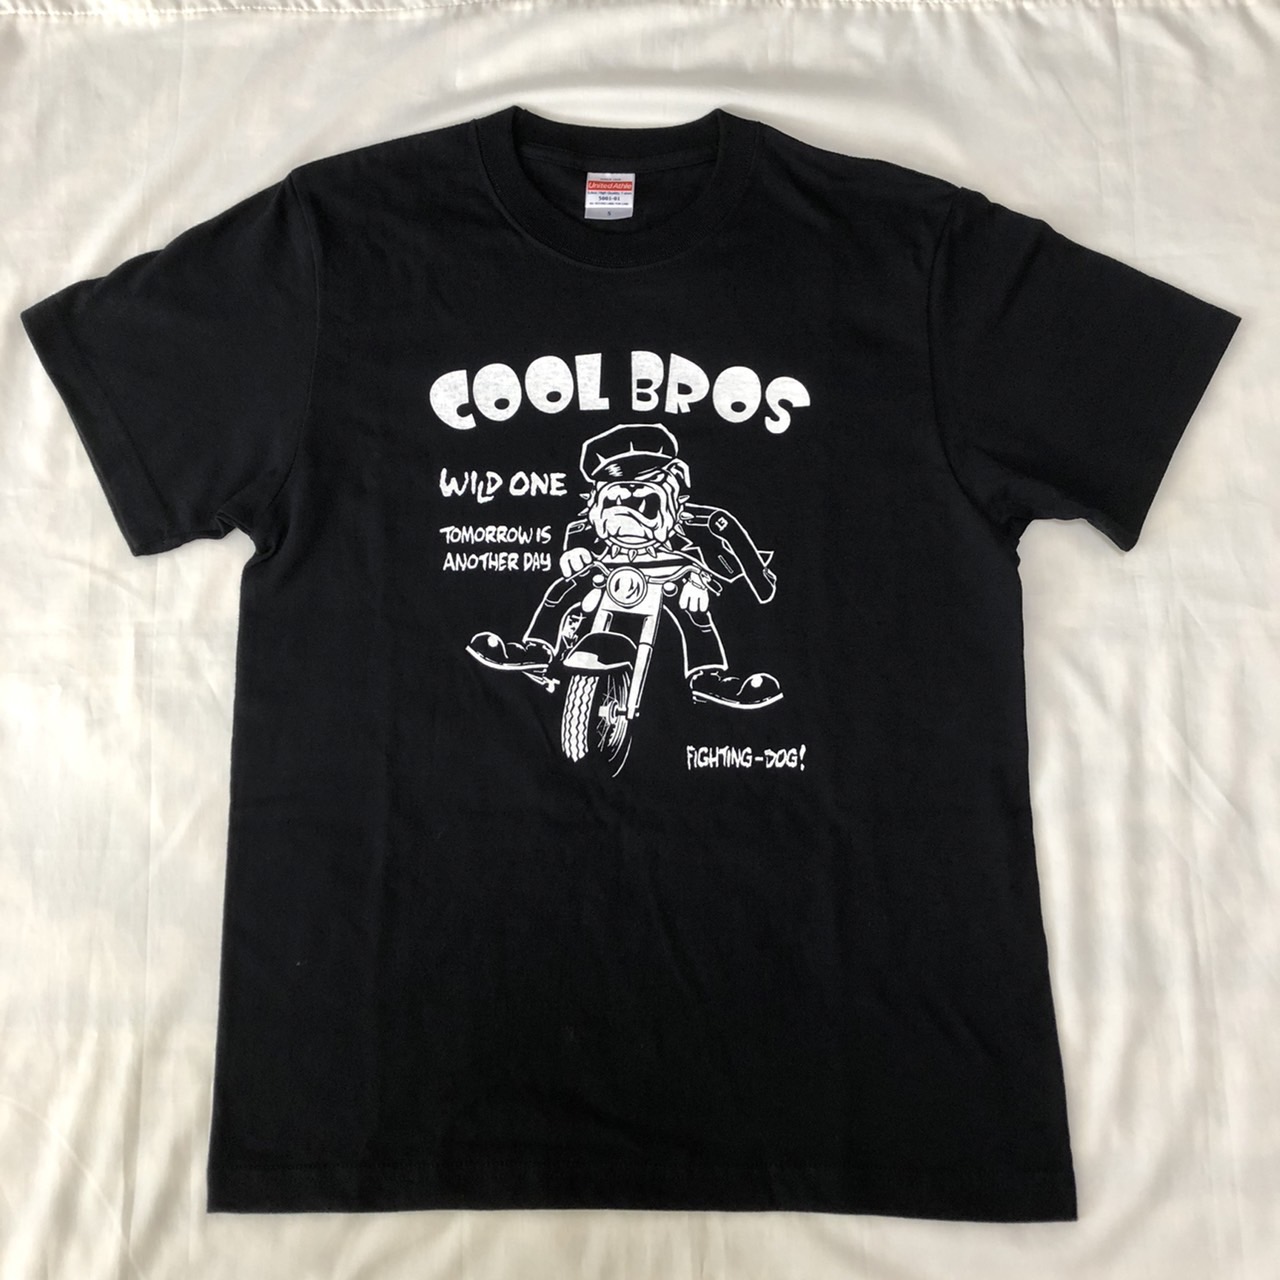 COOL BROS OFFICIAL SITE